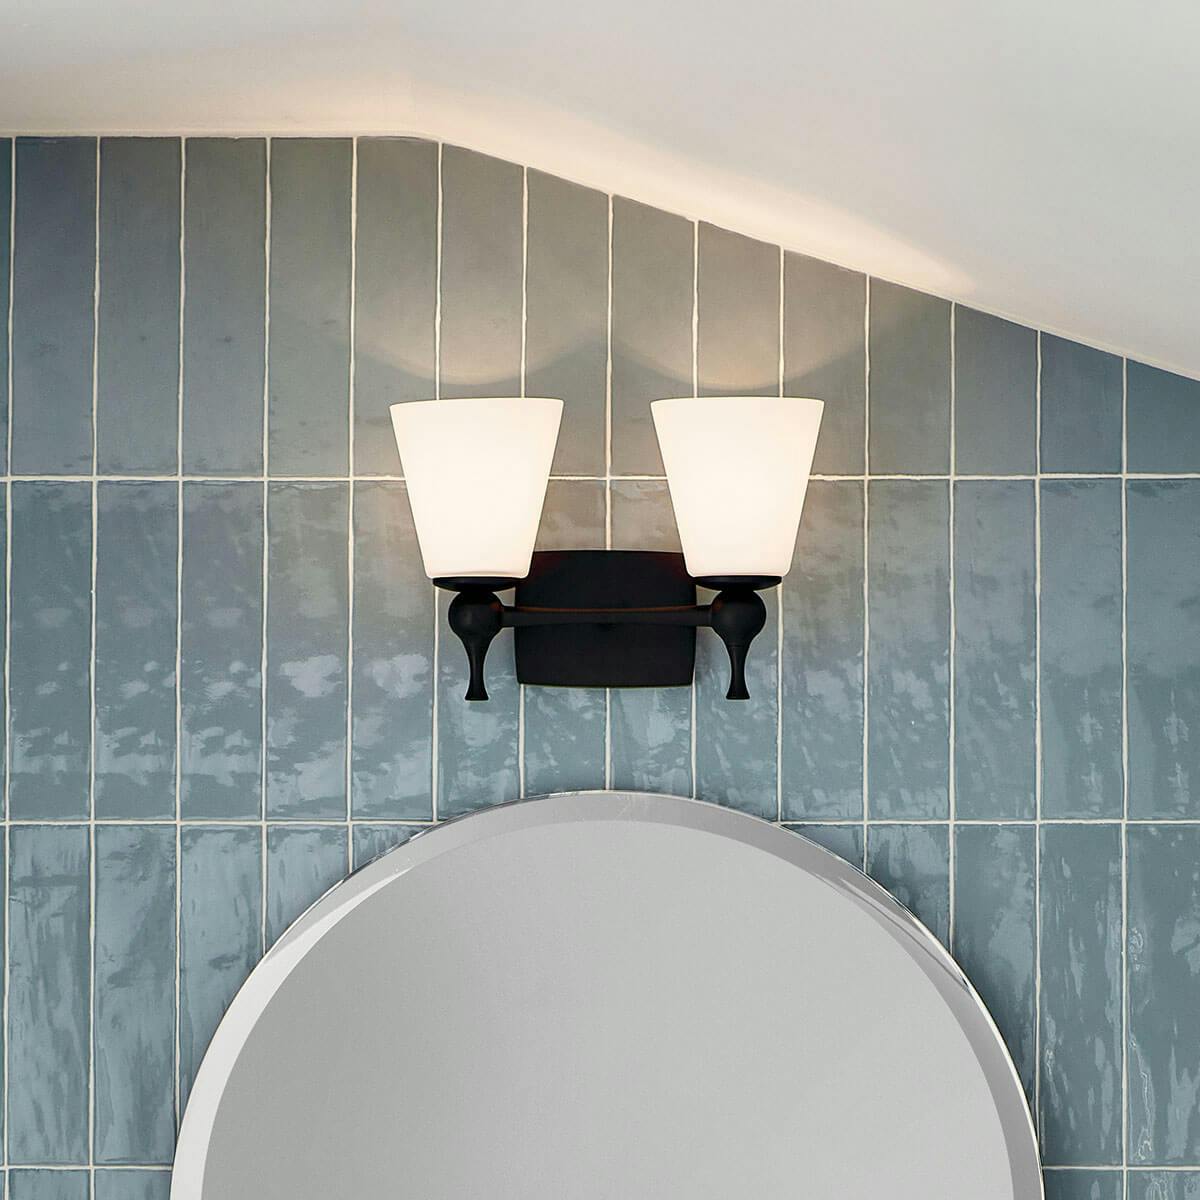 Day time Bathroom image featuring Cosabella vanity light 55091BK